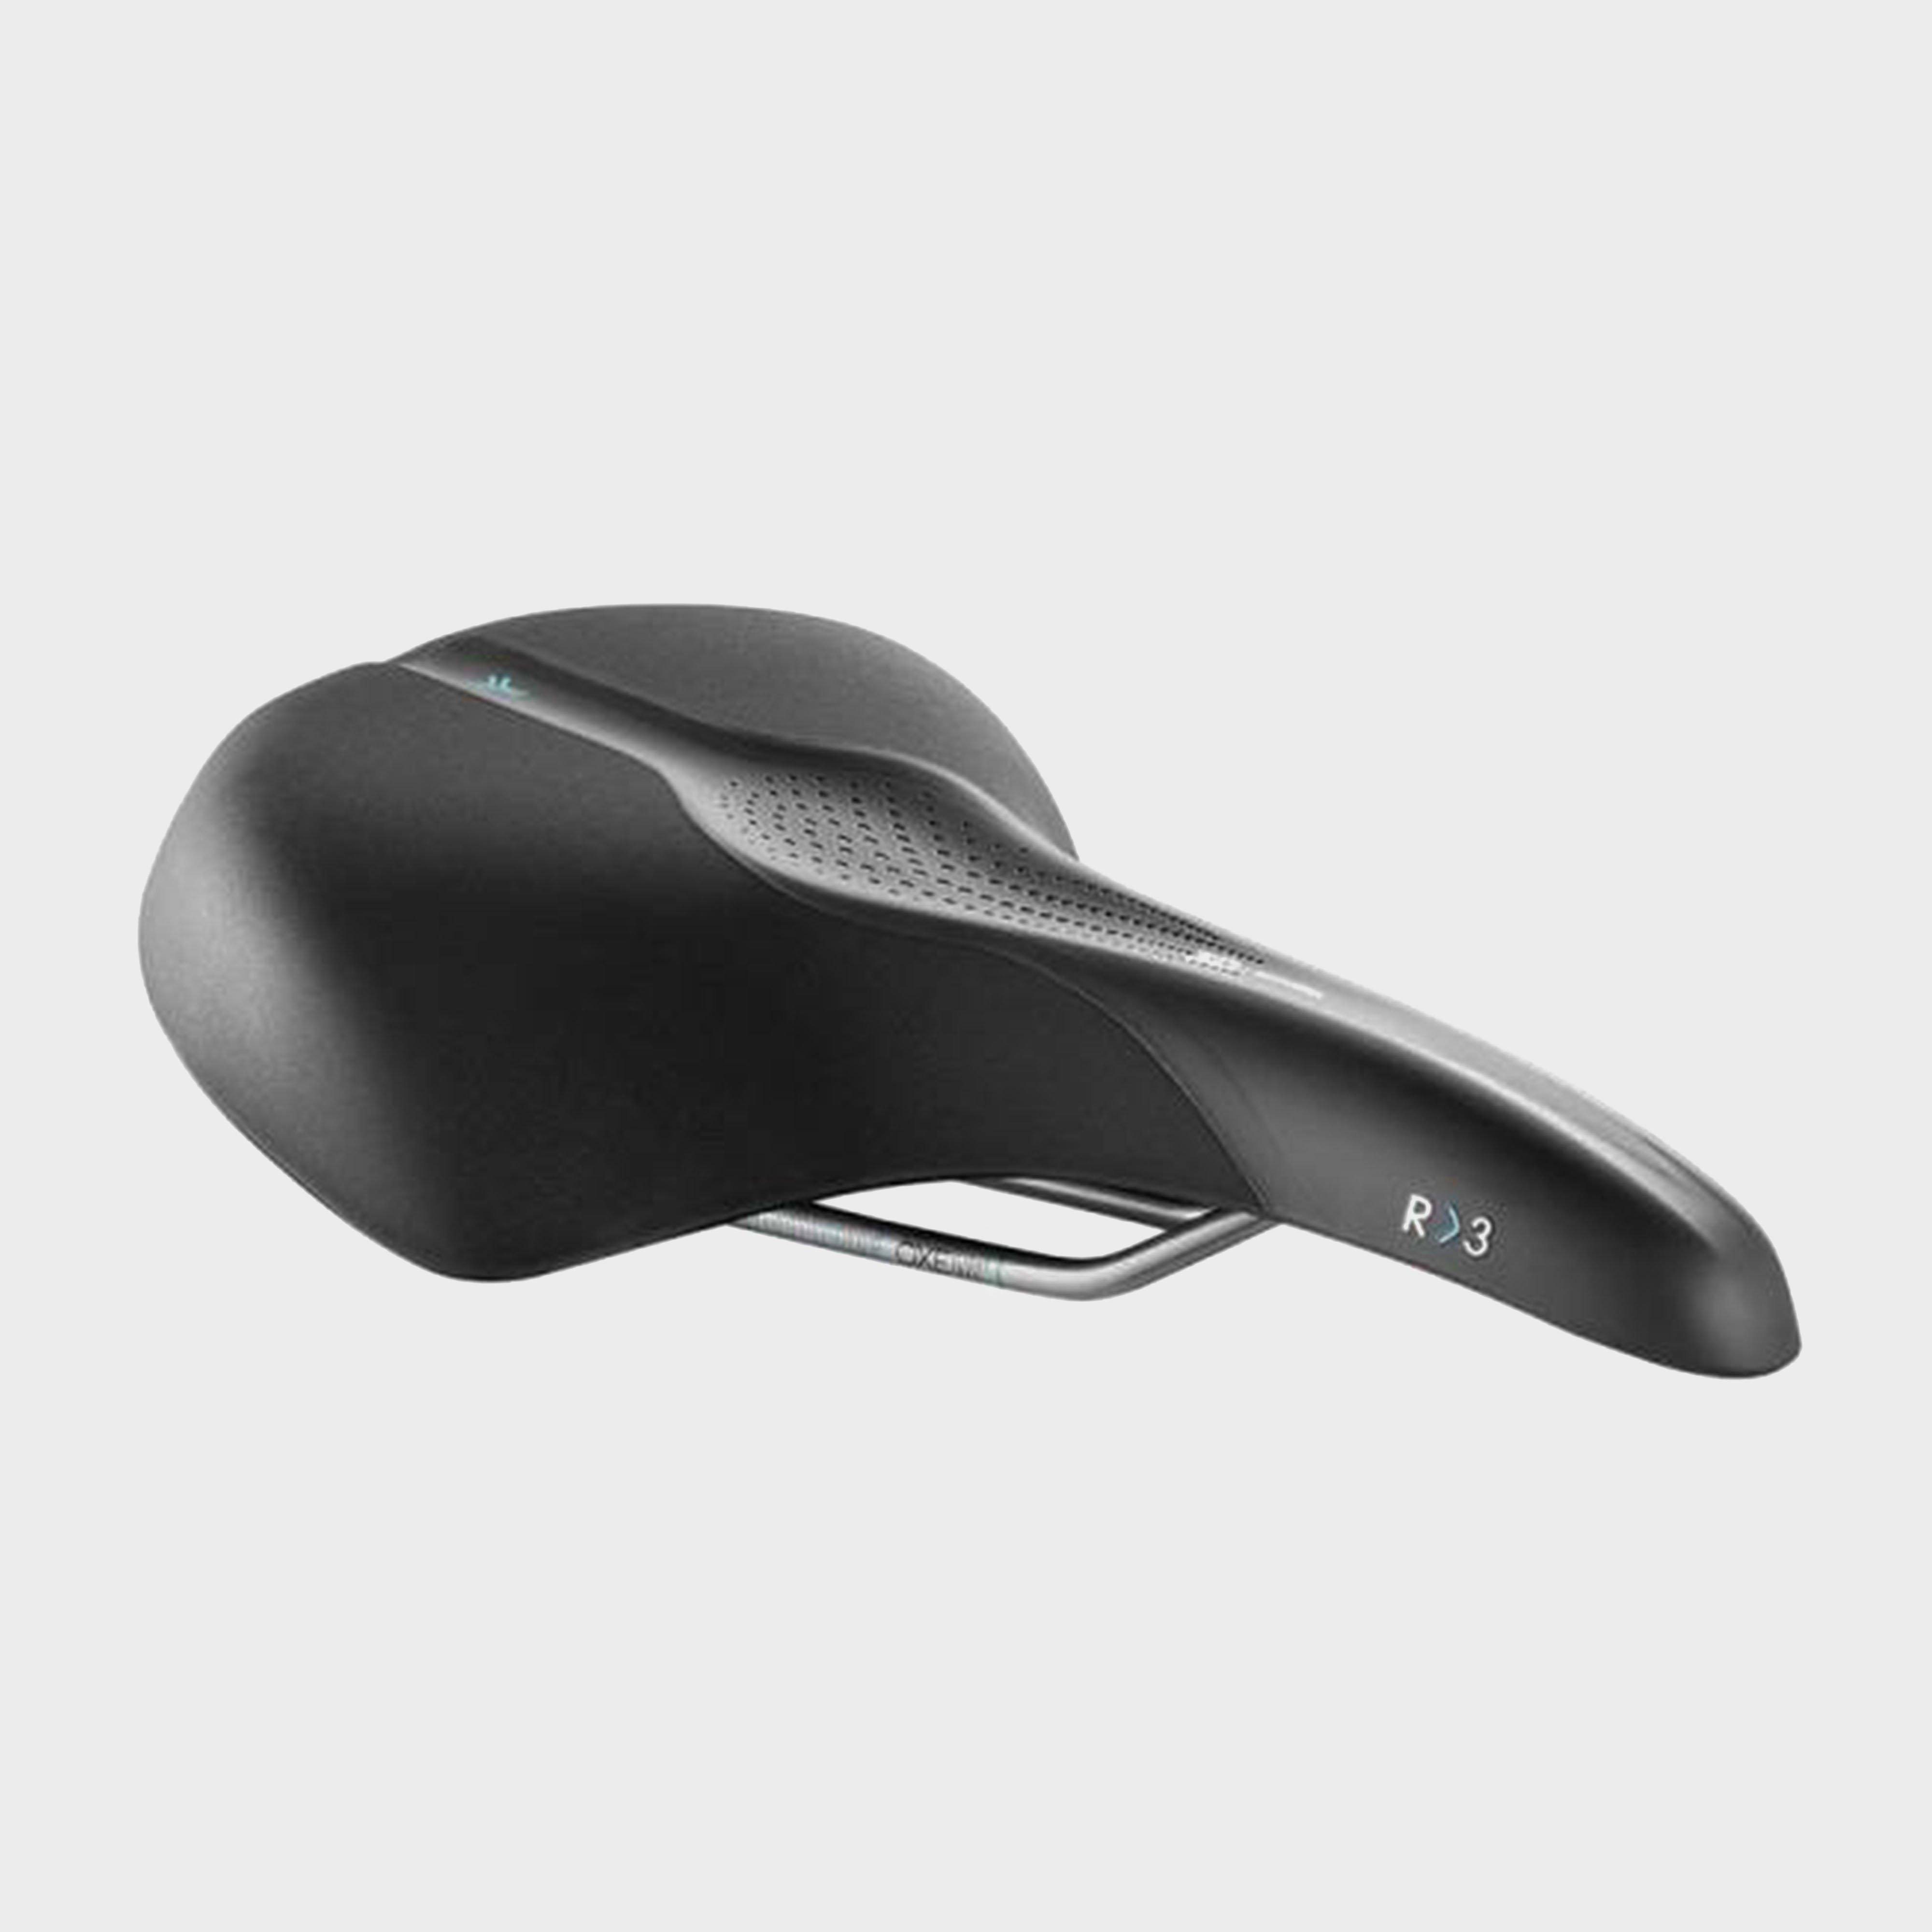 Selle Royal R3 Scientia Relaxed Bike Saddle - Black, Large